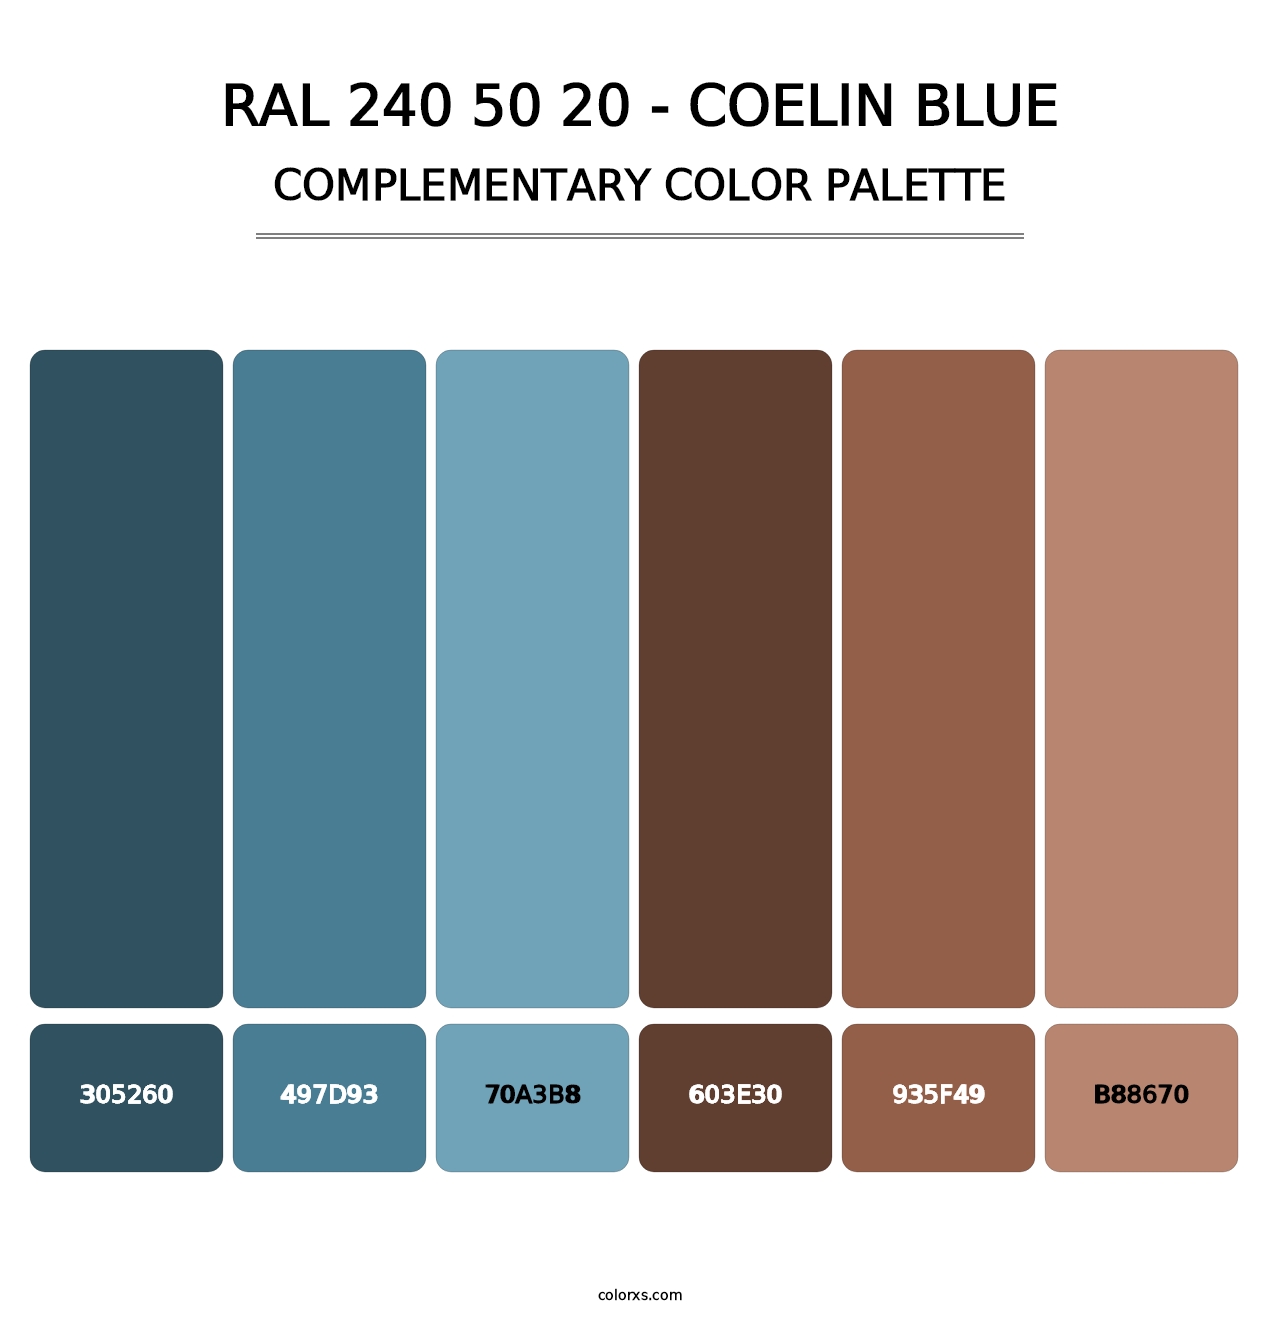 RAL 240 50 20 - Coelin Blue - Complementary Color Palette